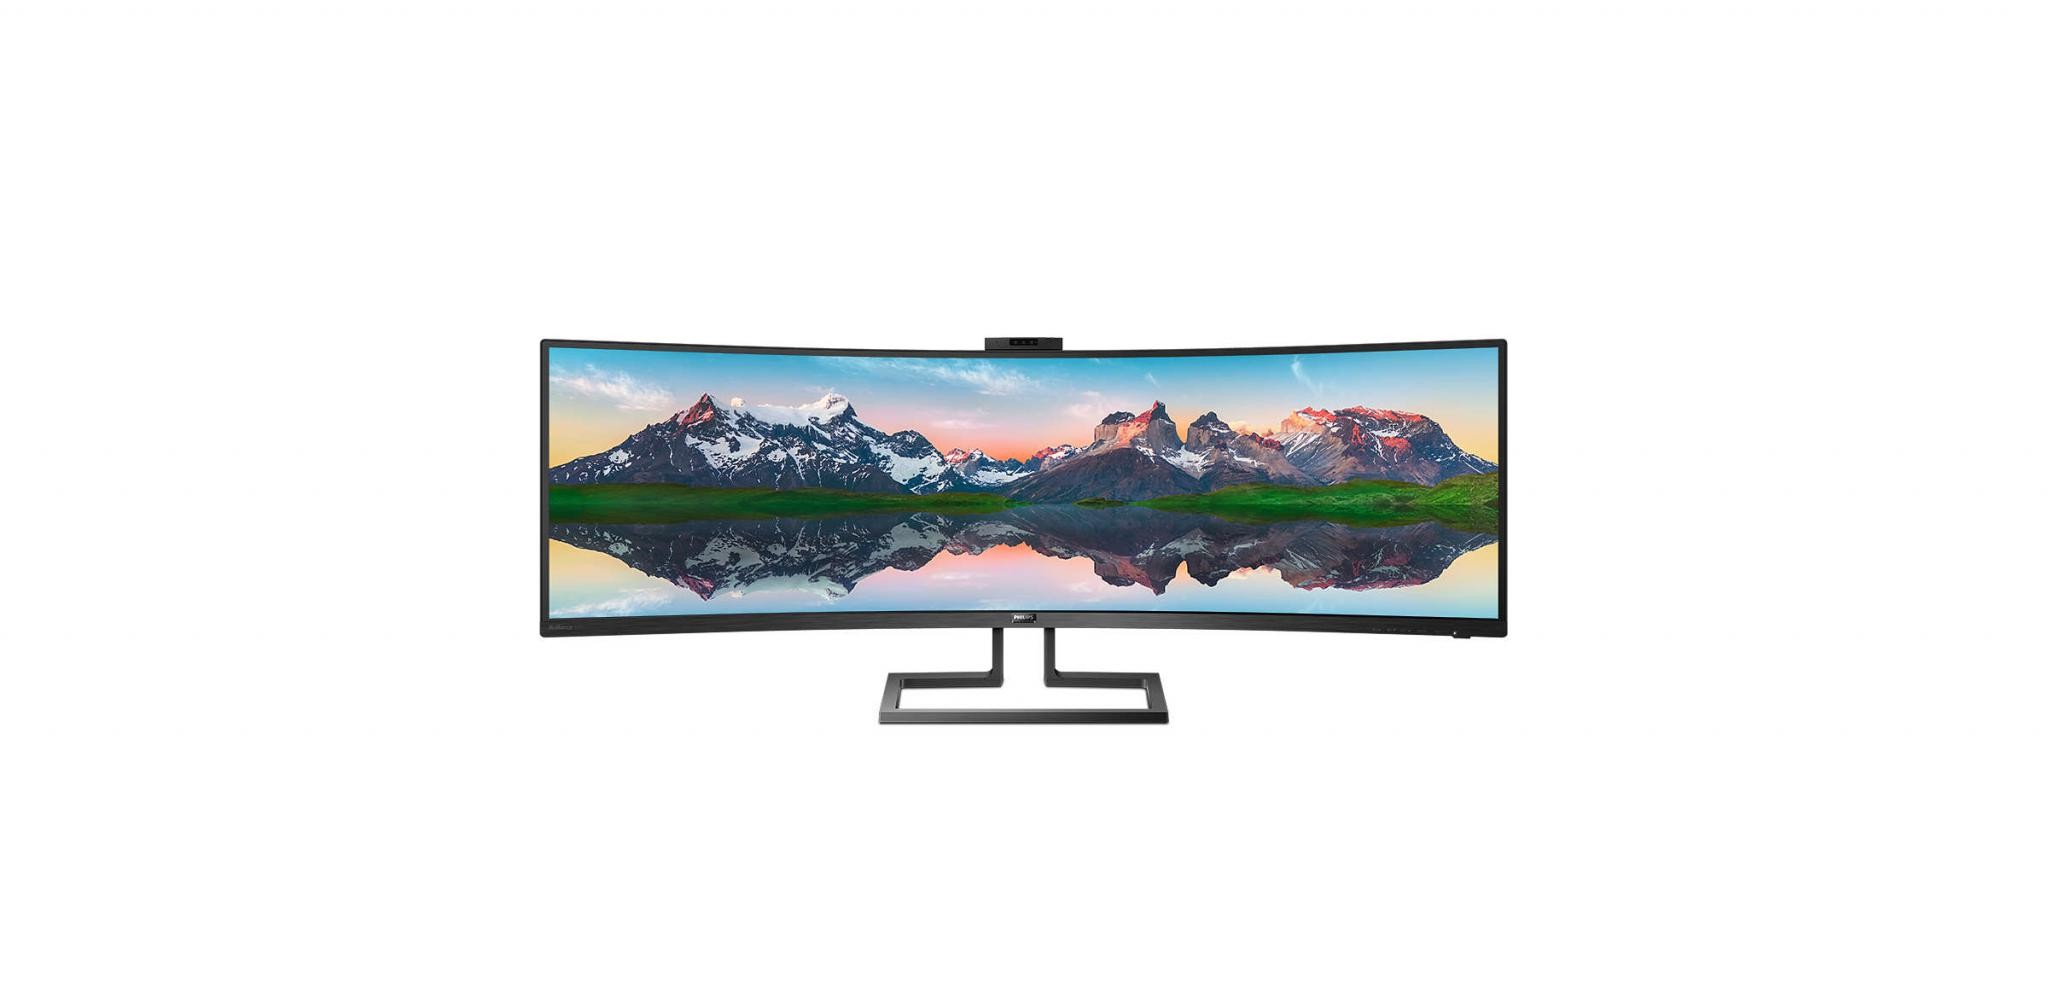 Monitor philips 499p9h 48.8 inch, panel type: va, backlight: wled, resolution: 5120x1440, aspect ratio: 32:9, refresh rate:70hz